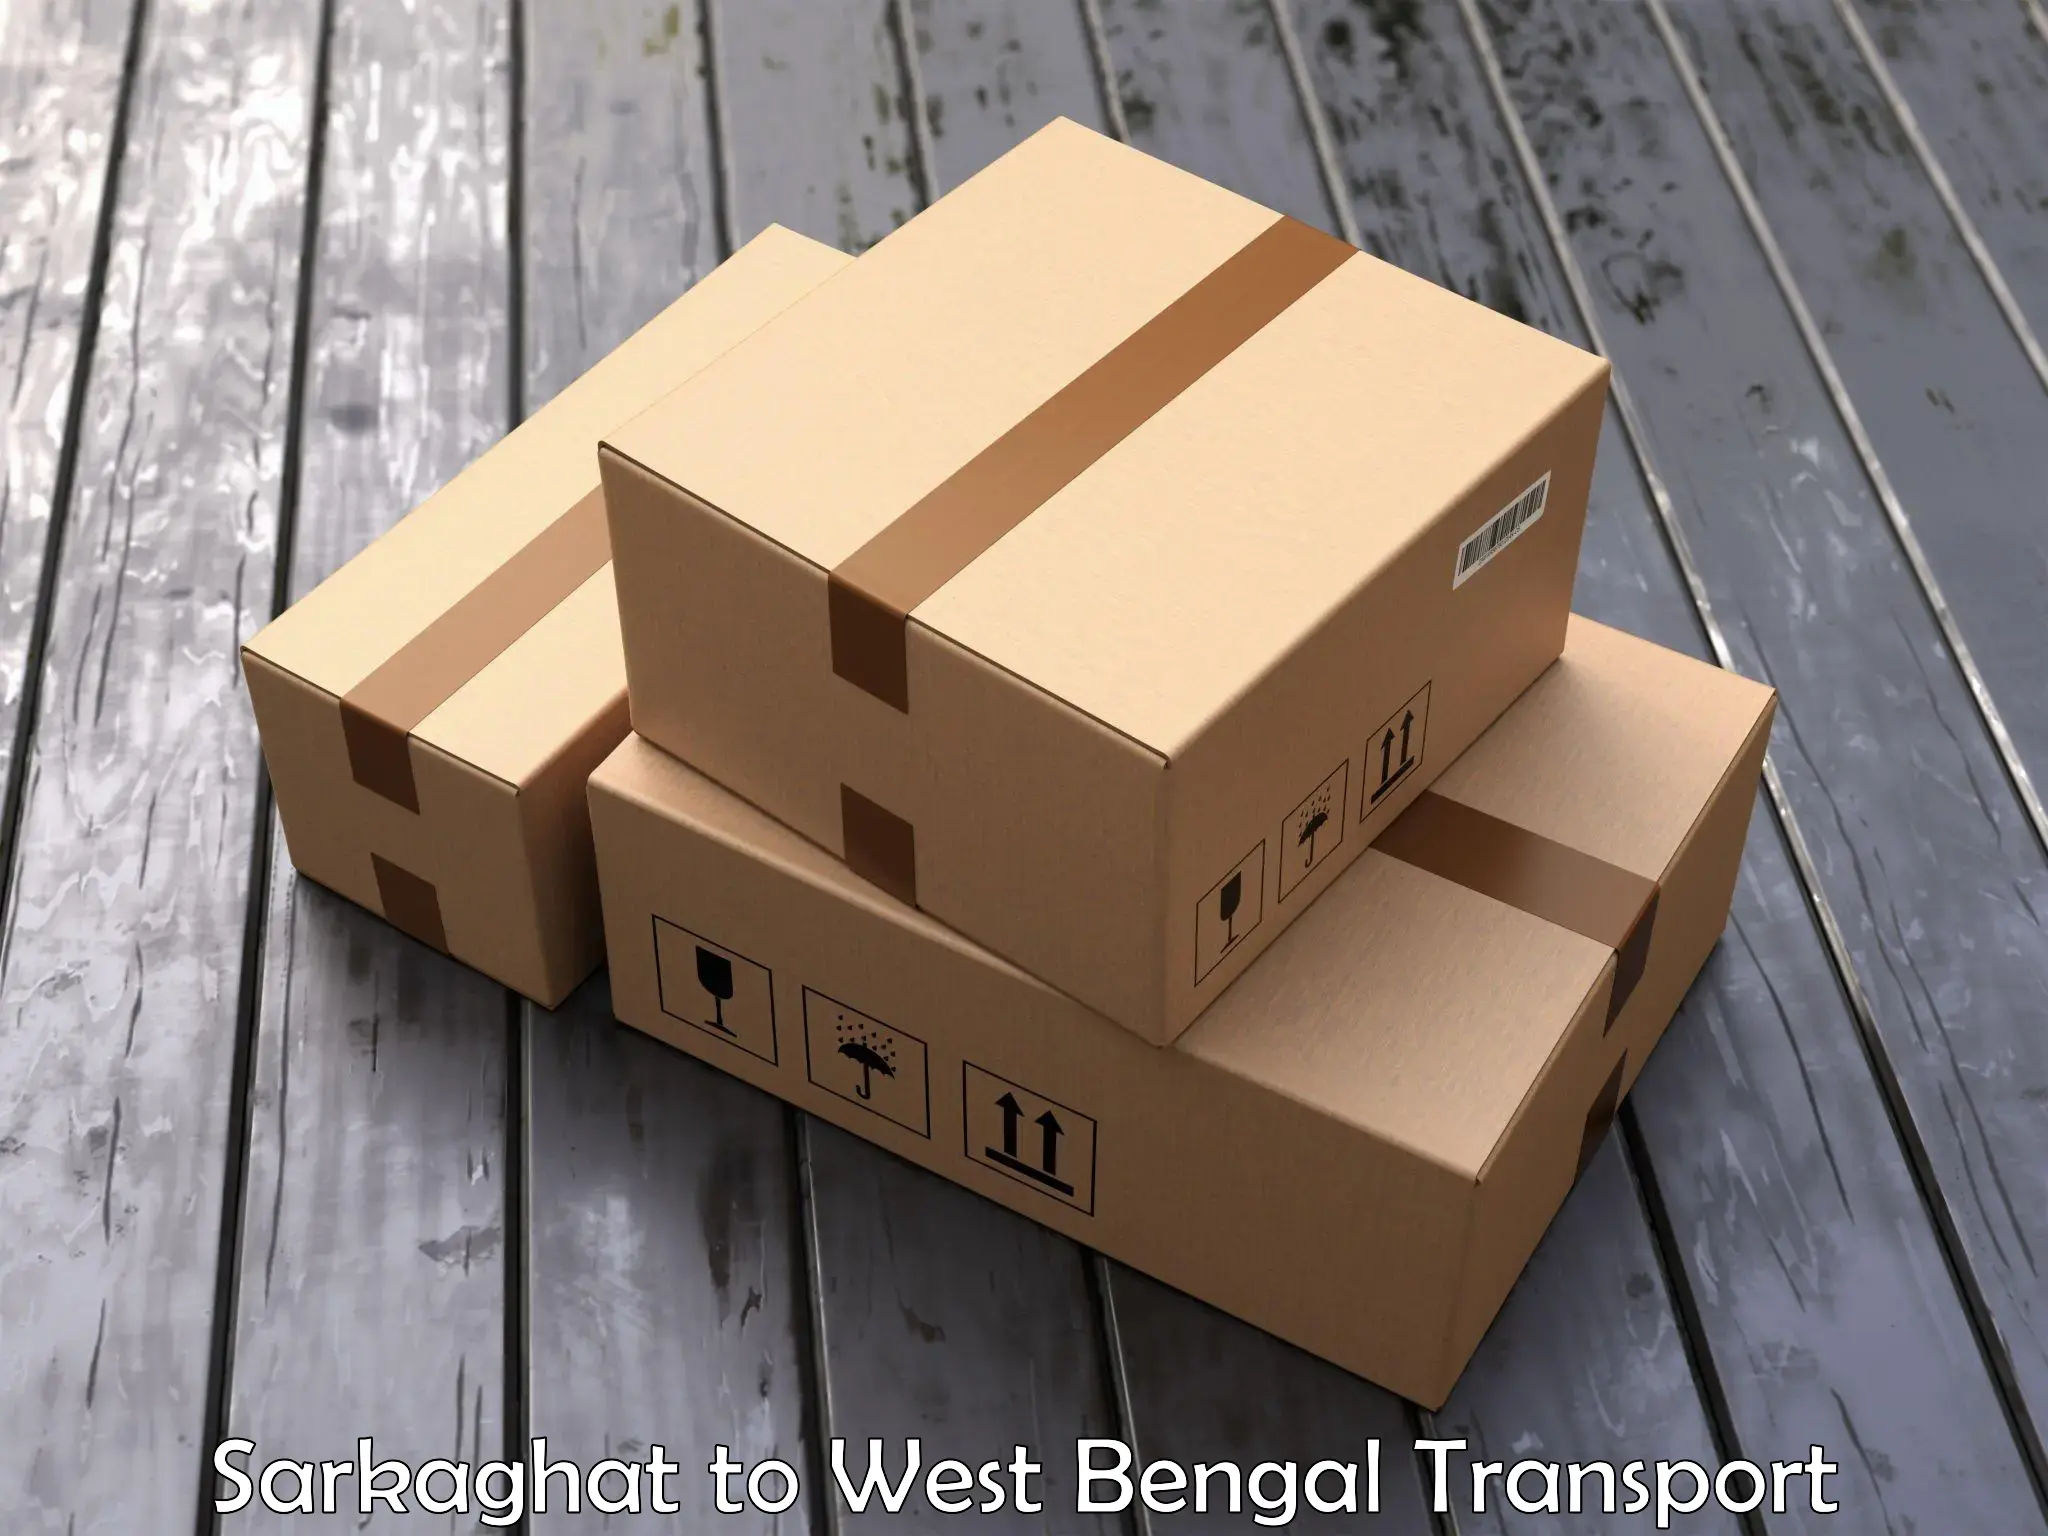 Bike shipping service Sarkaghat to West Bengal